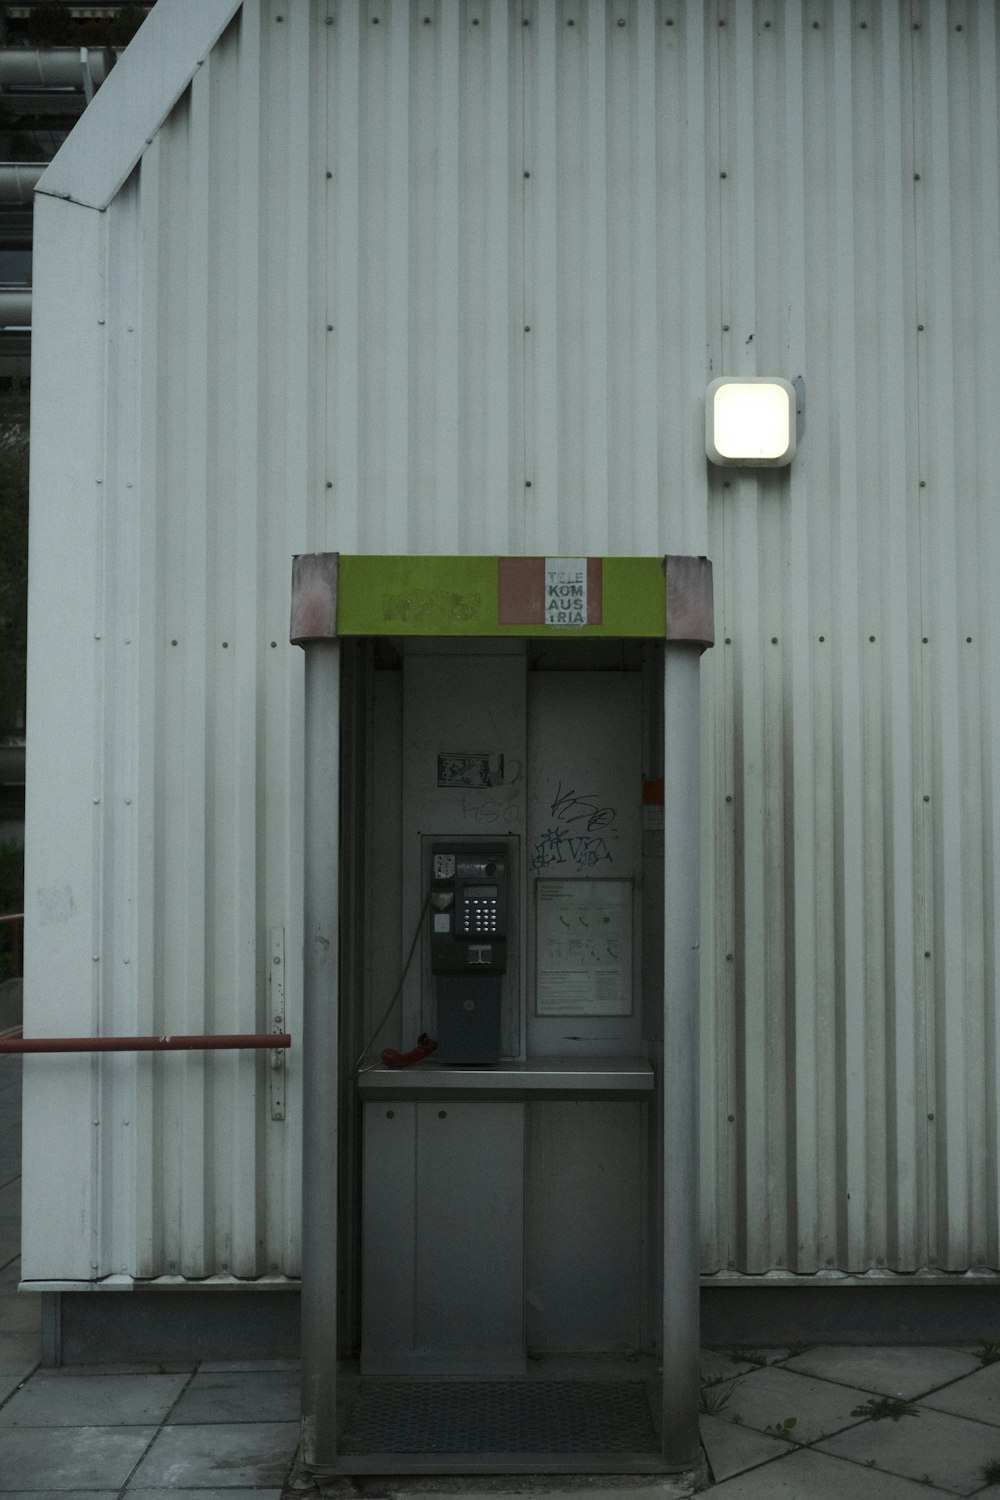 a white building with a green door and a phone